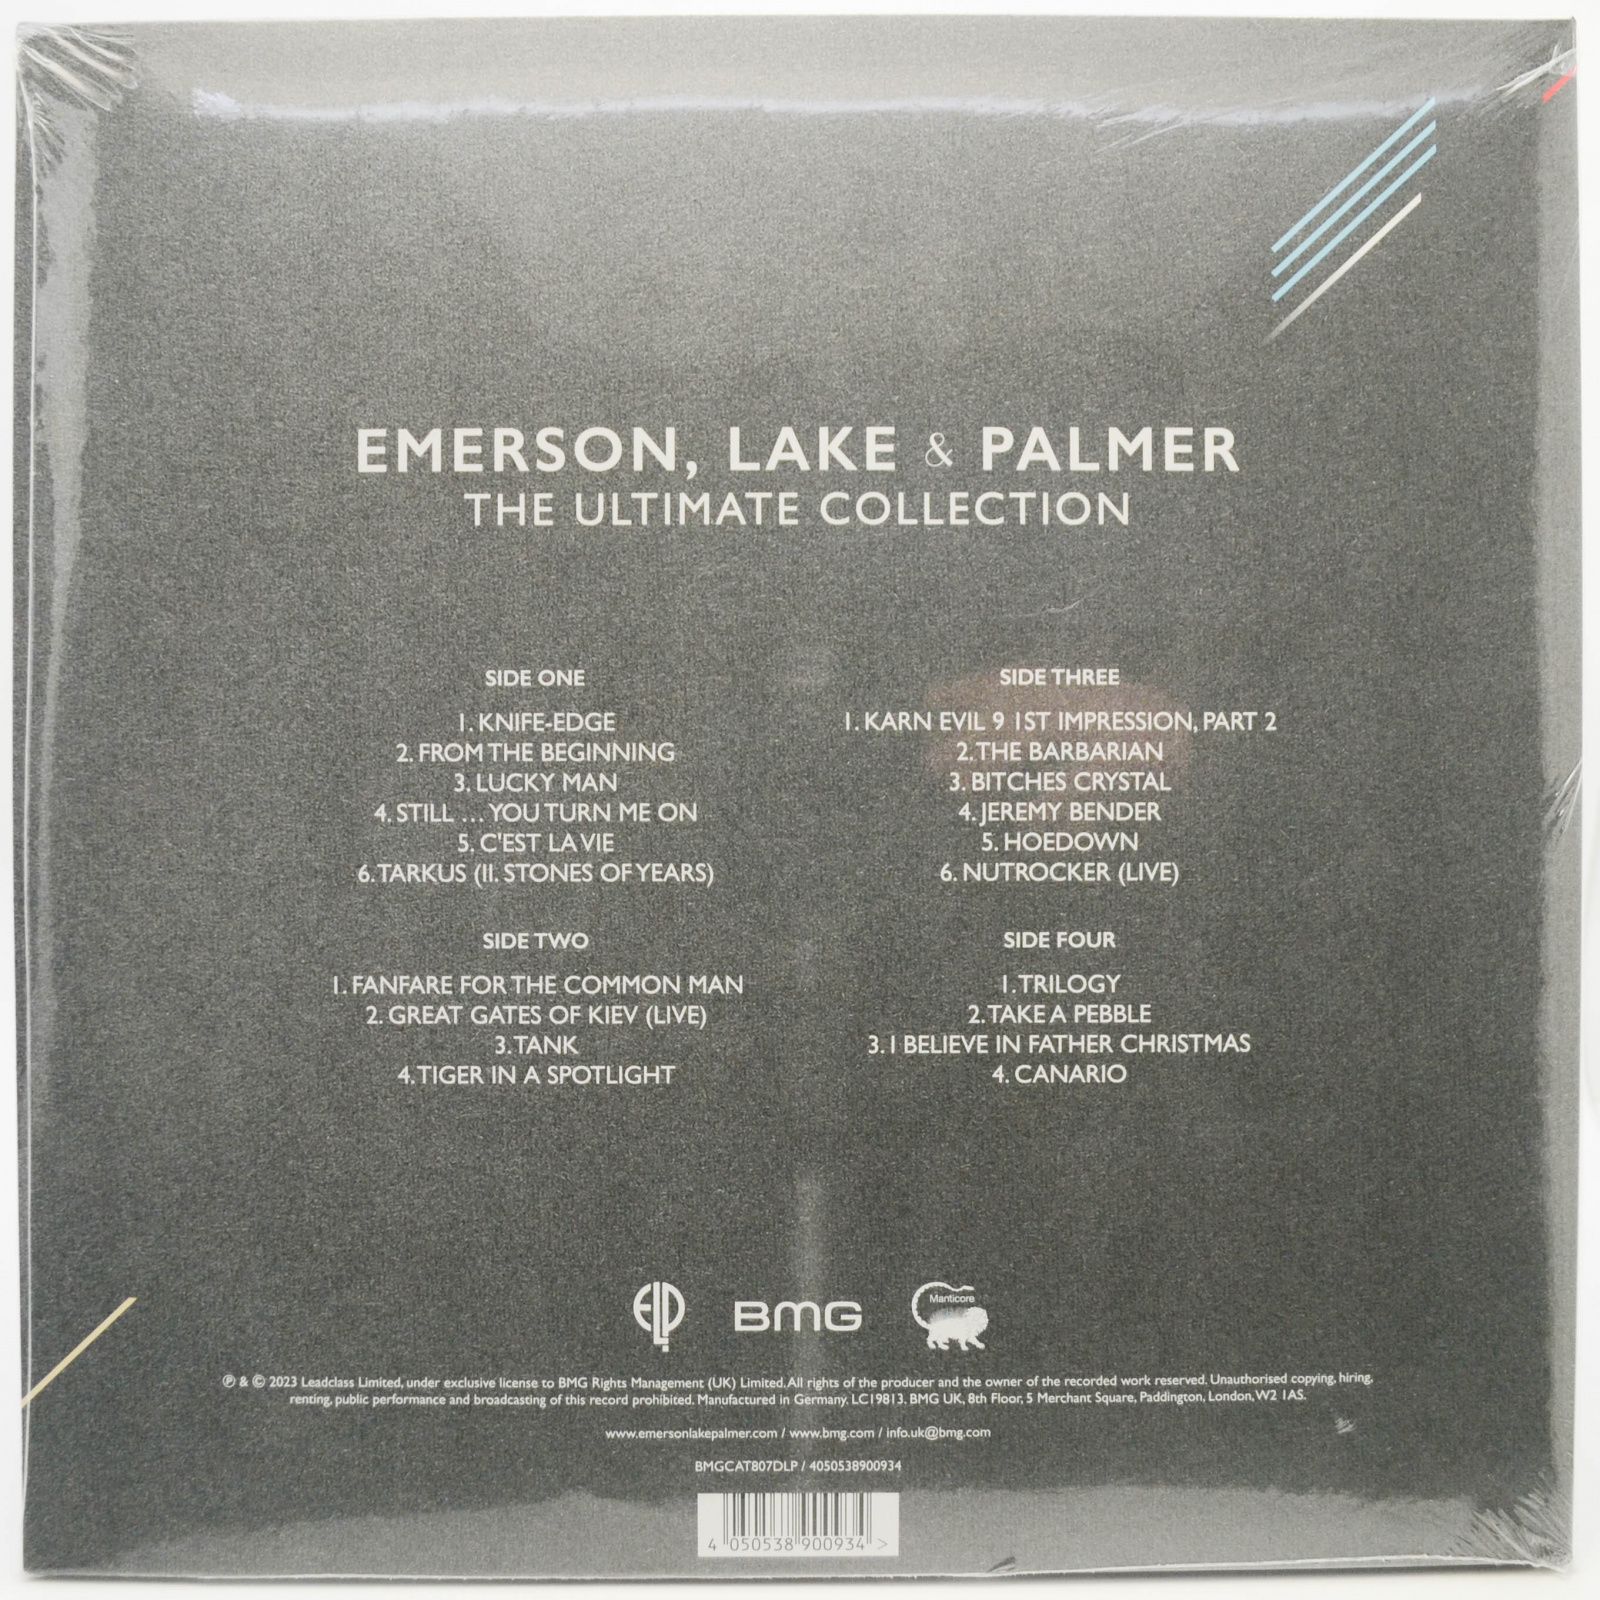 Emerson, Lake & Palmer — The Ultimate Collection (2LP), 2004